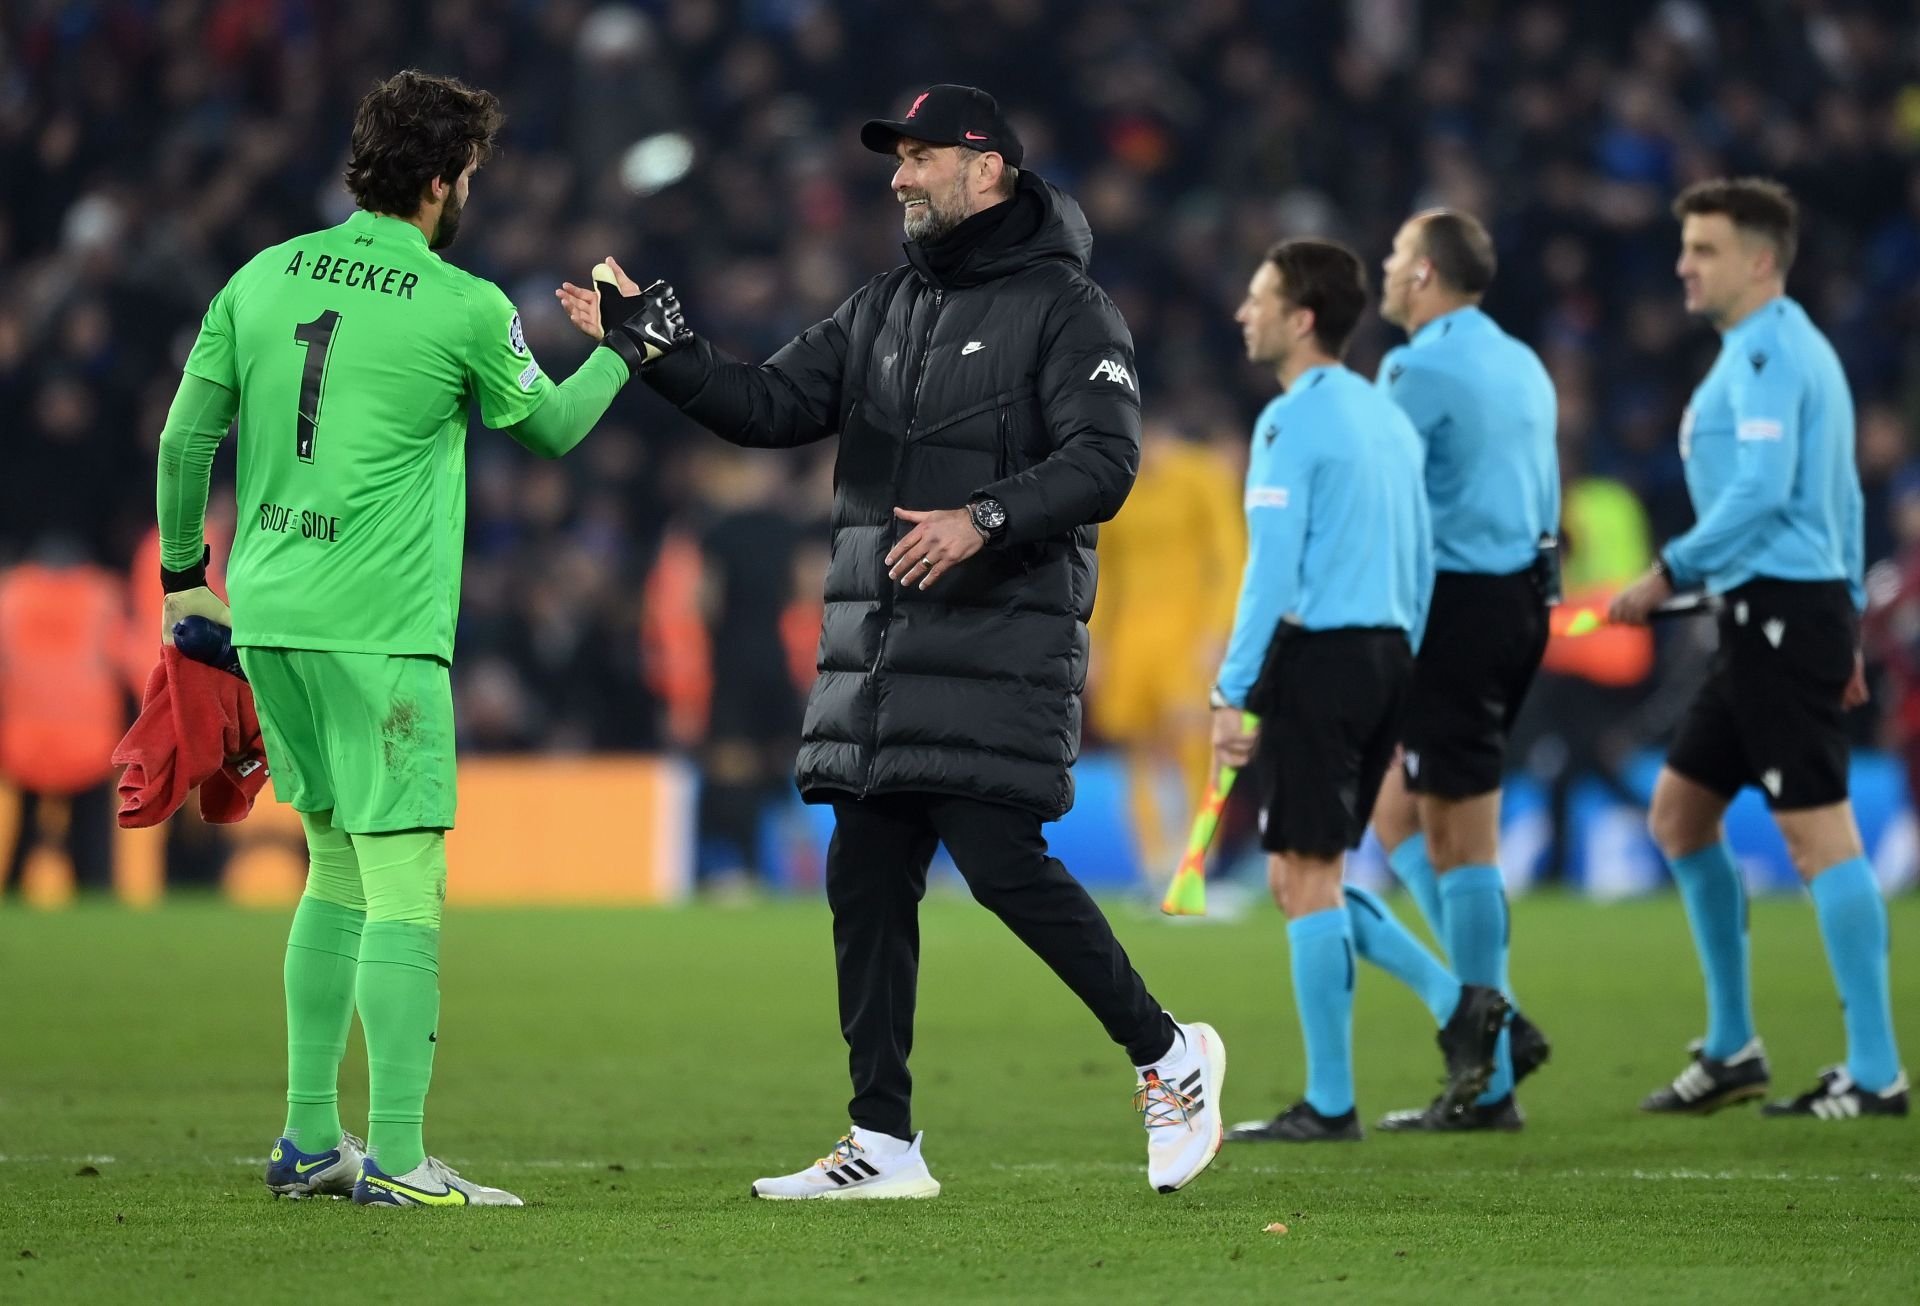 Liverpool manager Jurgen Klopp (r) and goalkeeper Alisson celebrate after sealing their progress into the Champions League quarterfinals